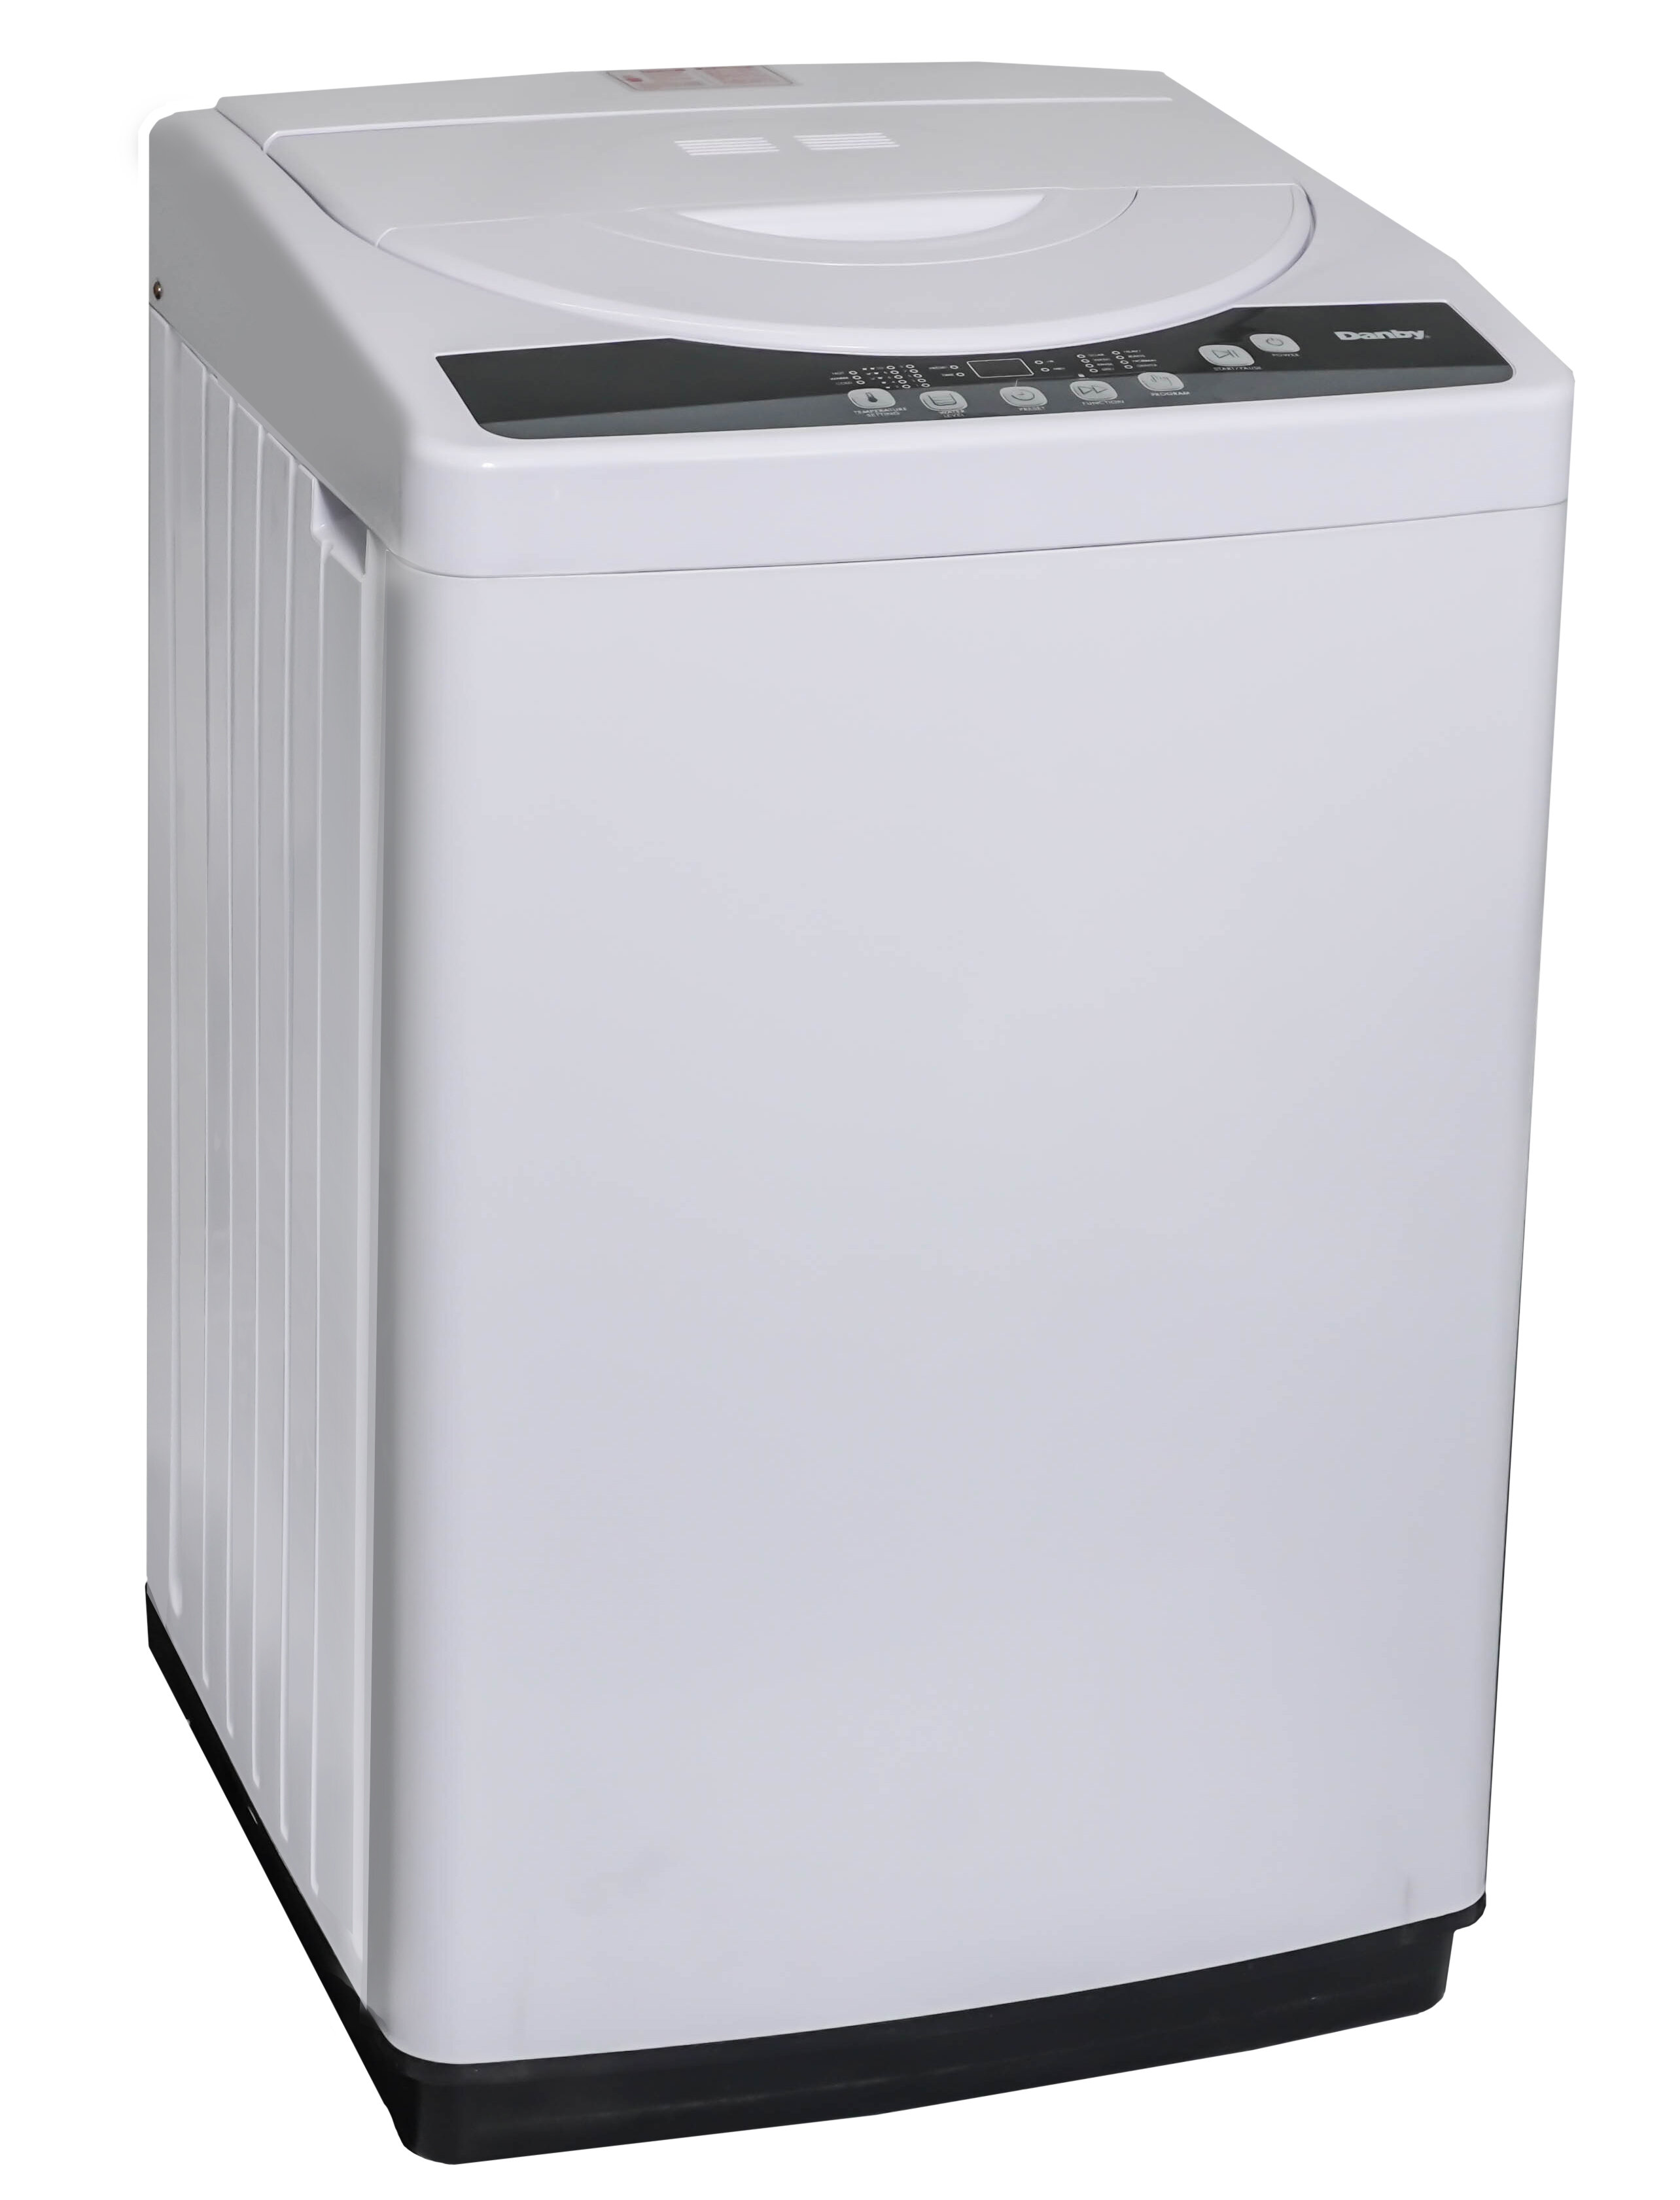 TABU 16.5 Cubic Feet cu. ft. High Efficiency Portable Washer & Dryer Combo  in White